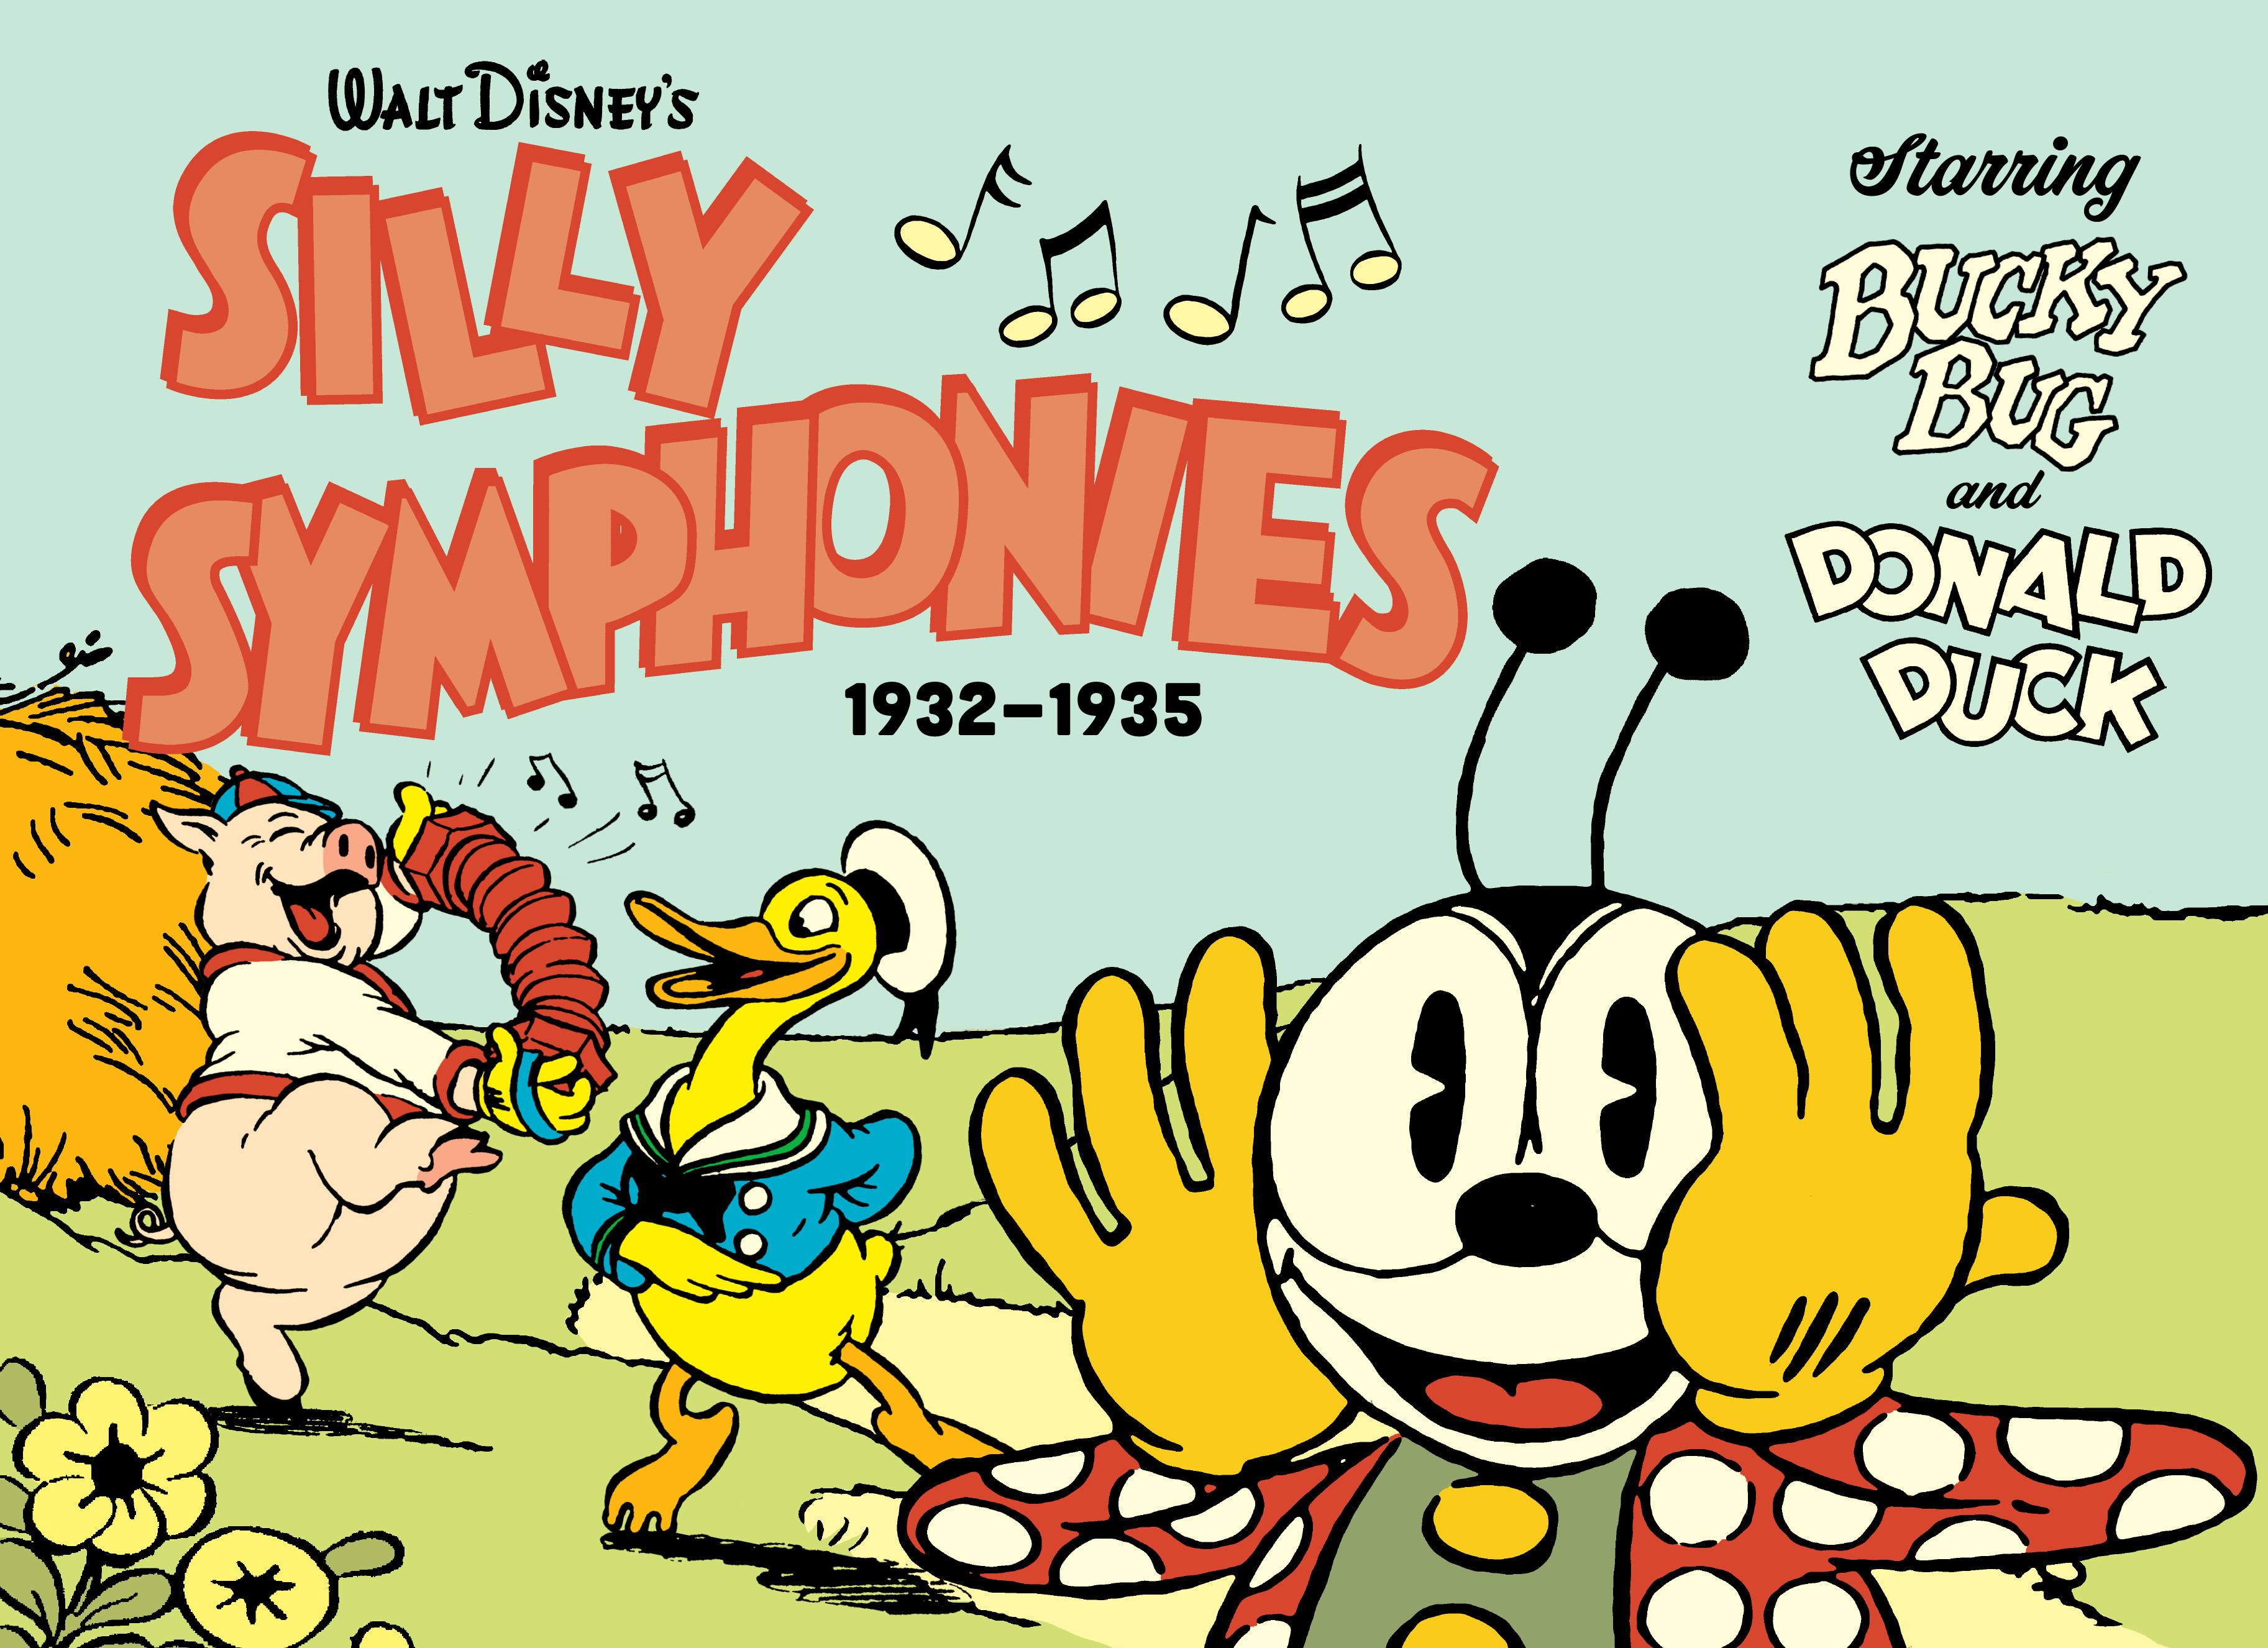 Read online Walt Disney's Silly Symphonies 1932-1935: Starring Bucky Bug and Donald Duck comic -  Issue # TPB (Part 1) - 1